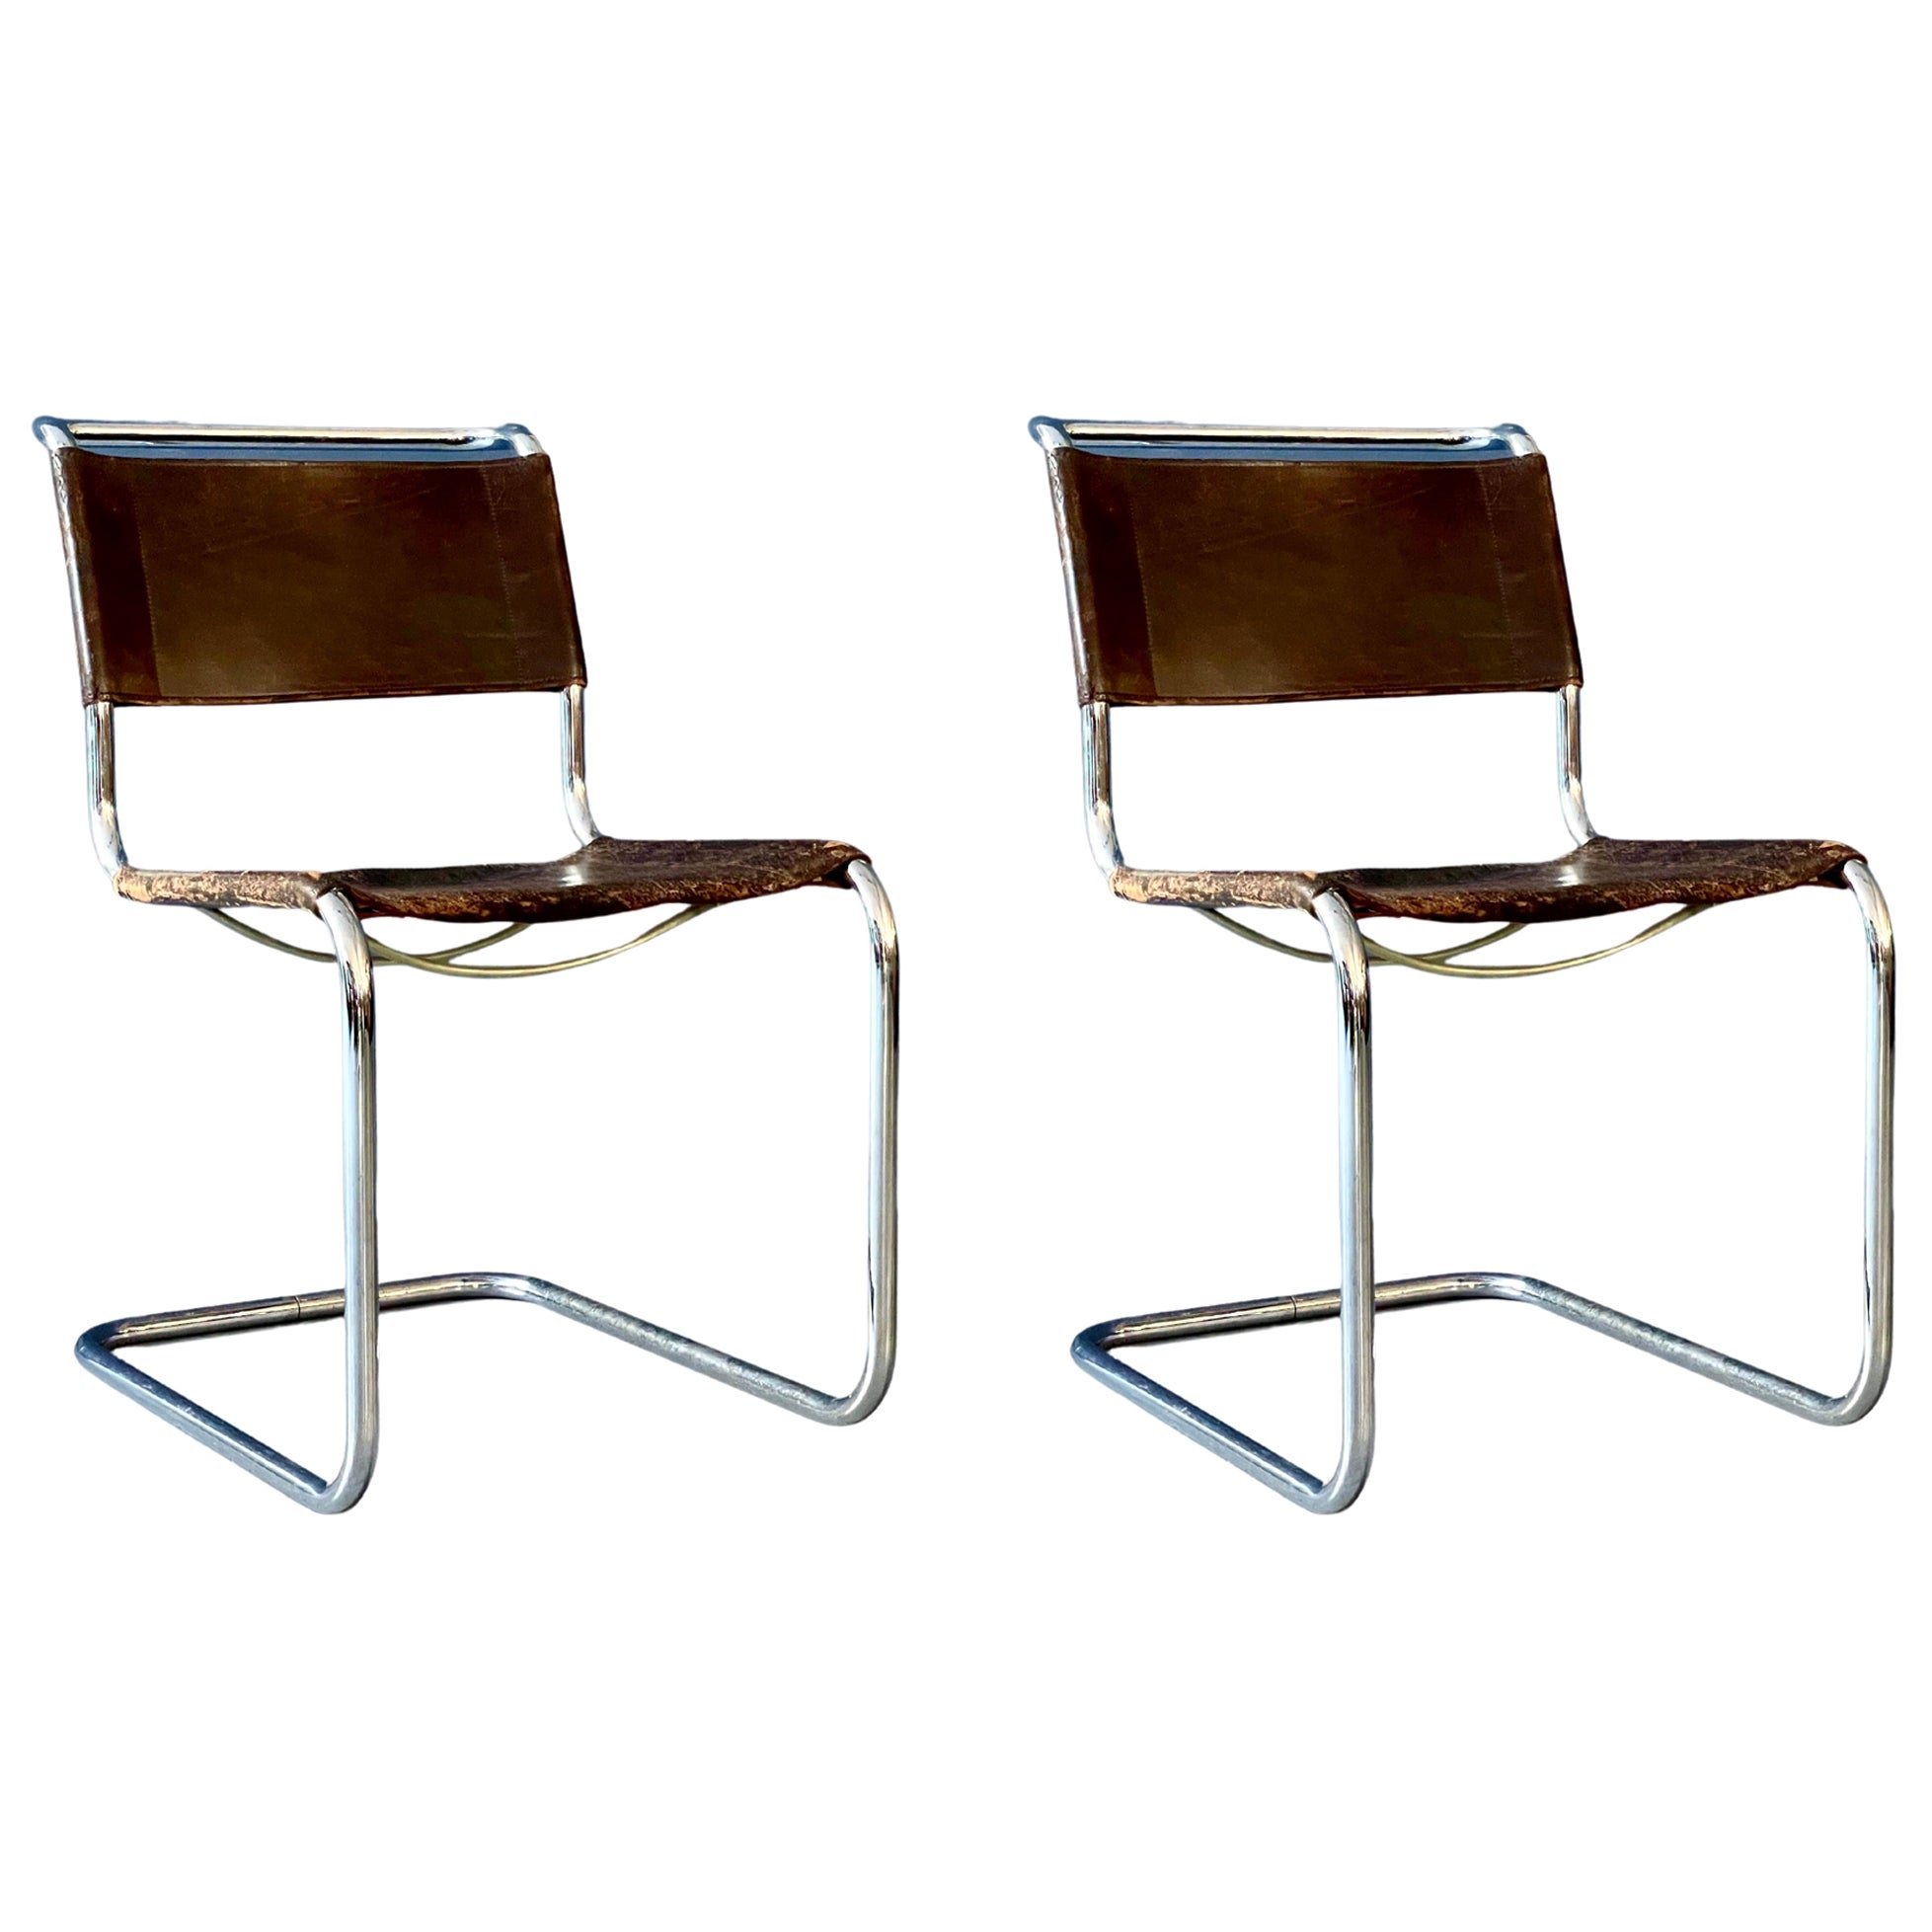 Pair of S33 Chairs by Mart Stam & Marcel Breuer for Thonet, 1984